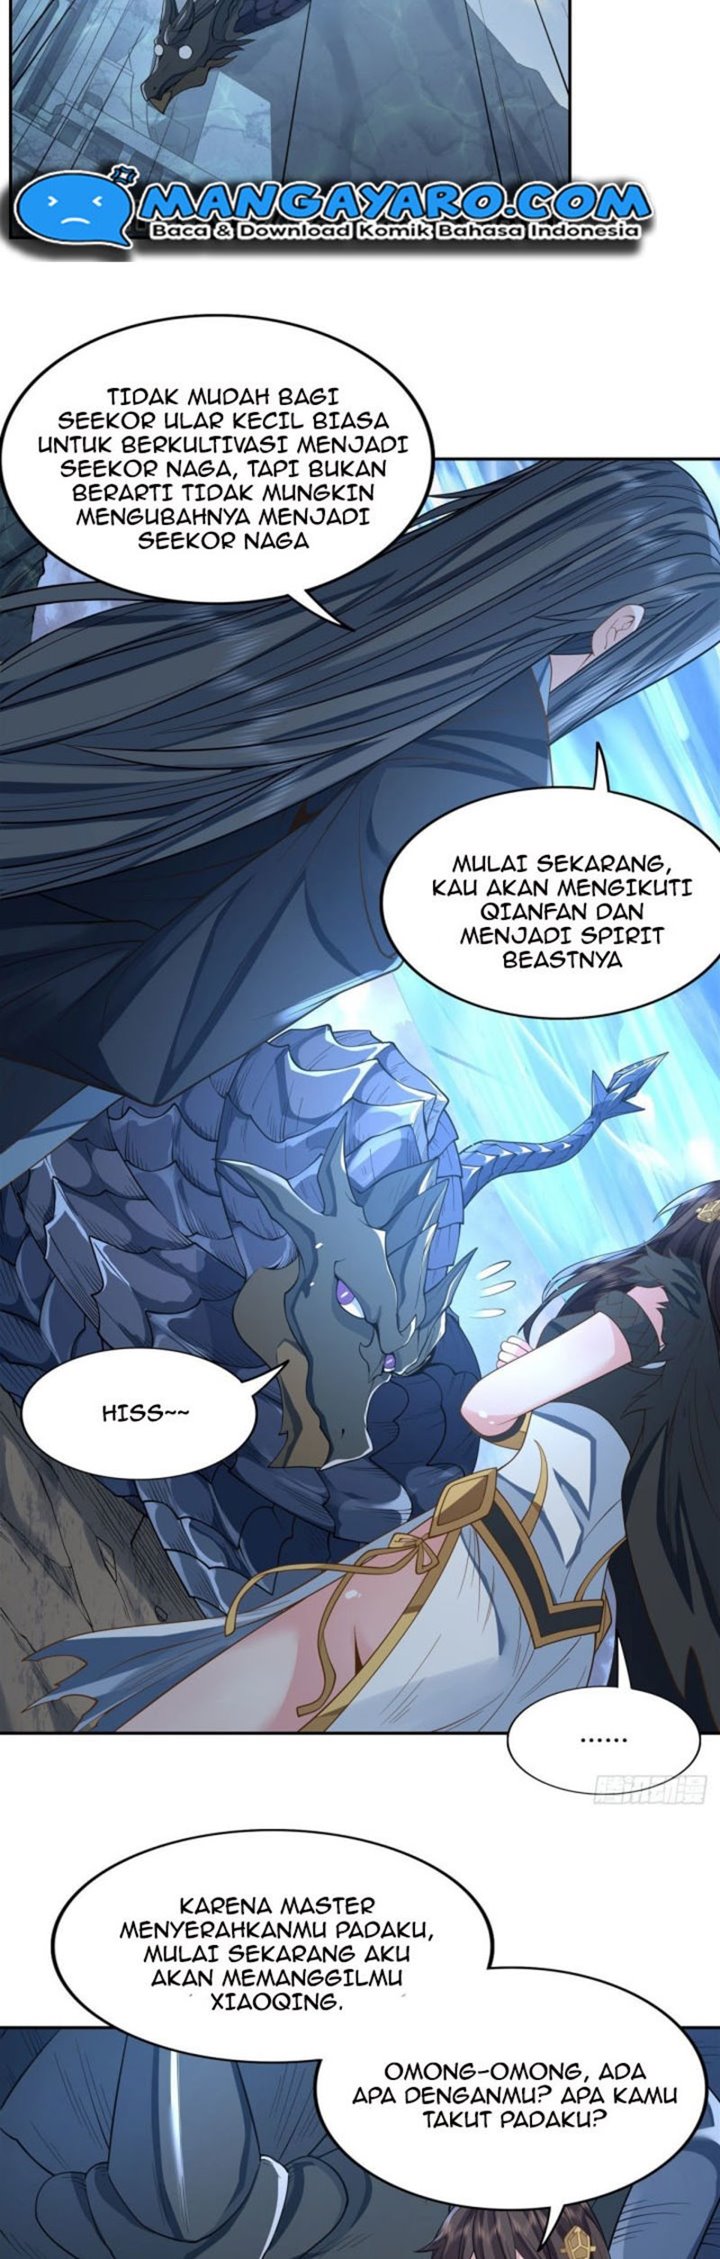 Dilarang COPAS - situs resmi www.mangacanblog.com - Komik my female apprentices are all big shots from the future 014 - chapter 14 15 Indonesia my female apprentices are all big shots from the future 014 - chapter 14 Terbaru 14|Baca Manga Komik Indonesia|Mangacan